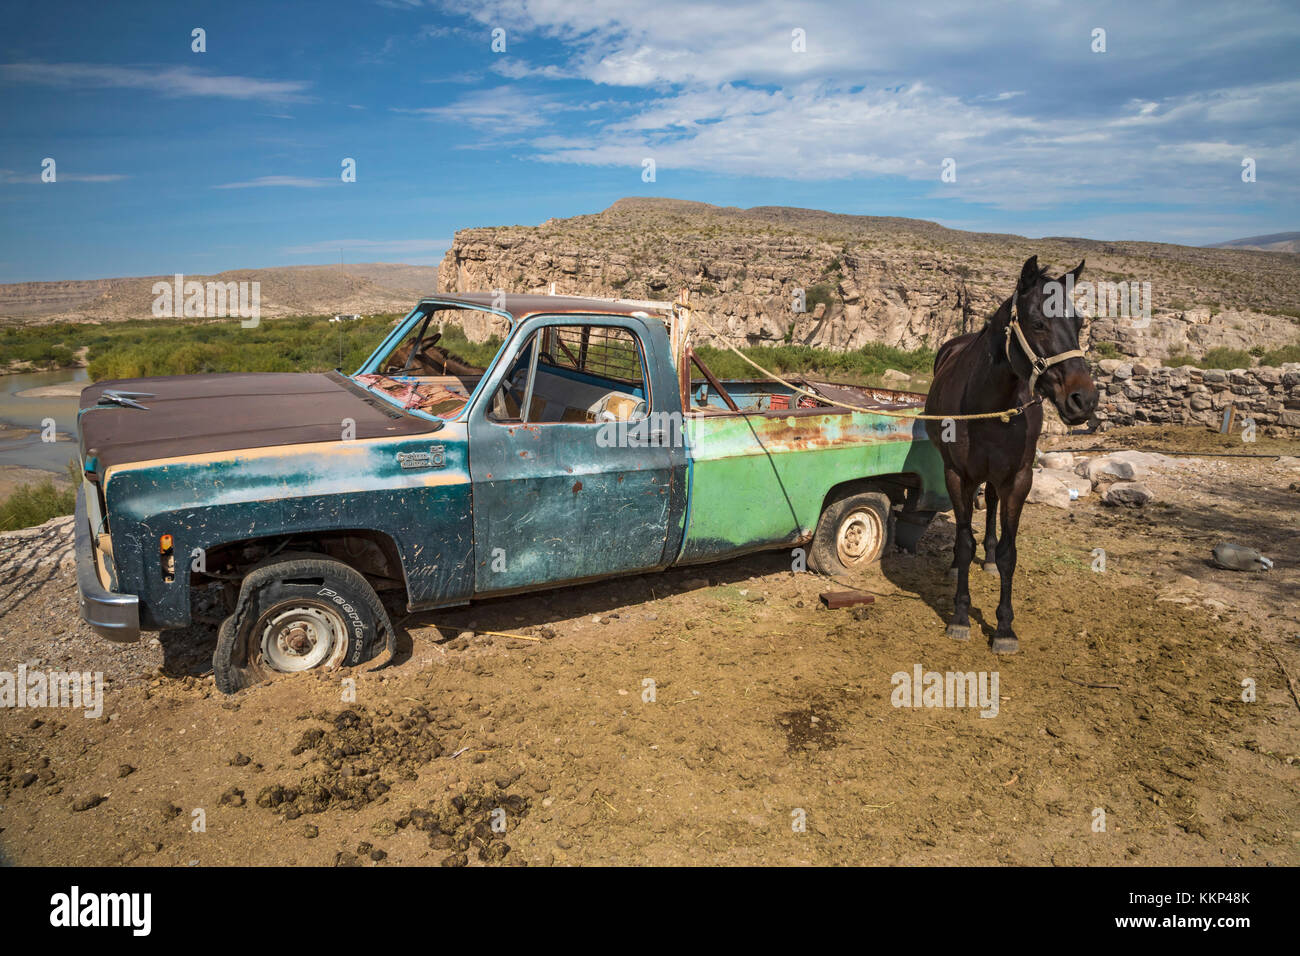 Boquillas del Carmen, Coahuila, Mexico - A dilapidated truck serves as a hitching post for a horse in the small border town of Boquillas. The town is  Stock Photo